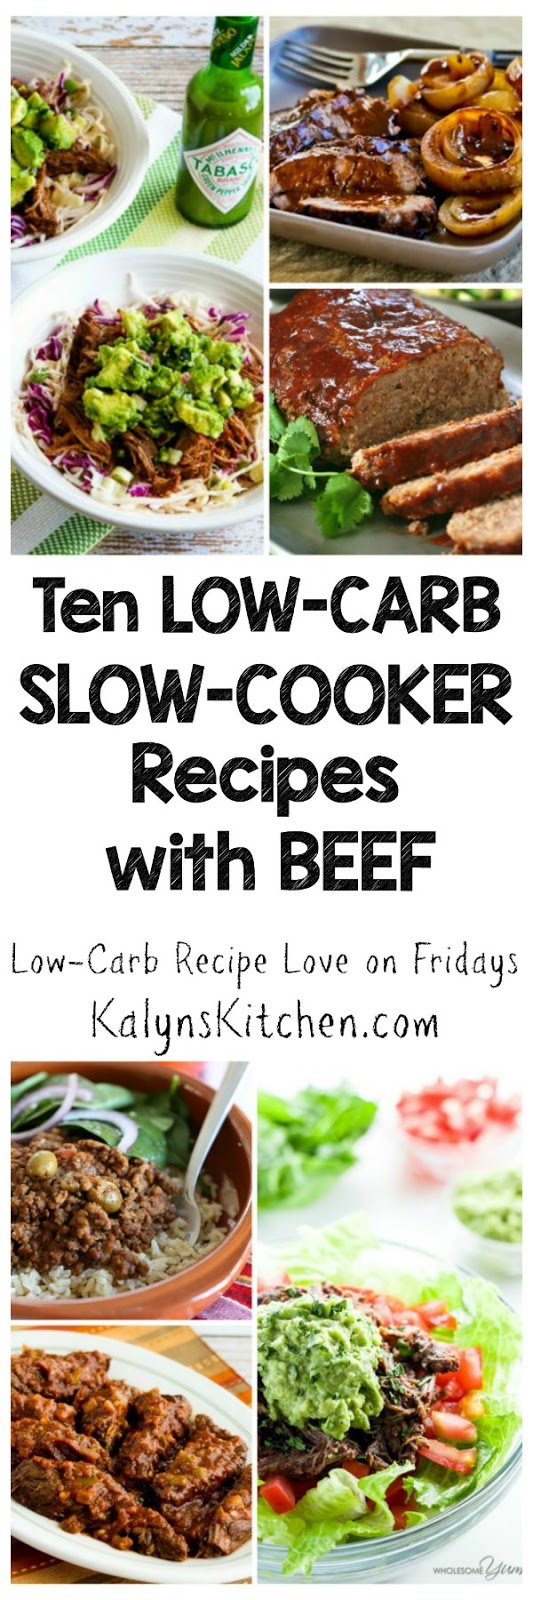 Ten Low-Carb Slow Cooker Recipes with Beef - Kalyn's Kitchen